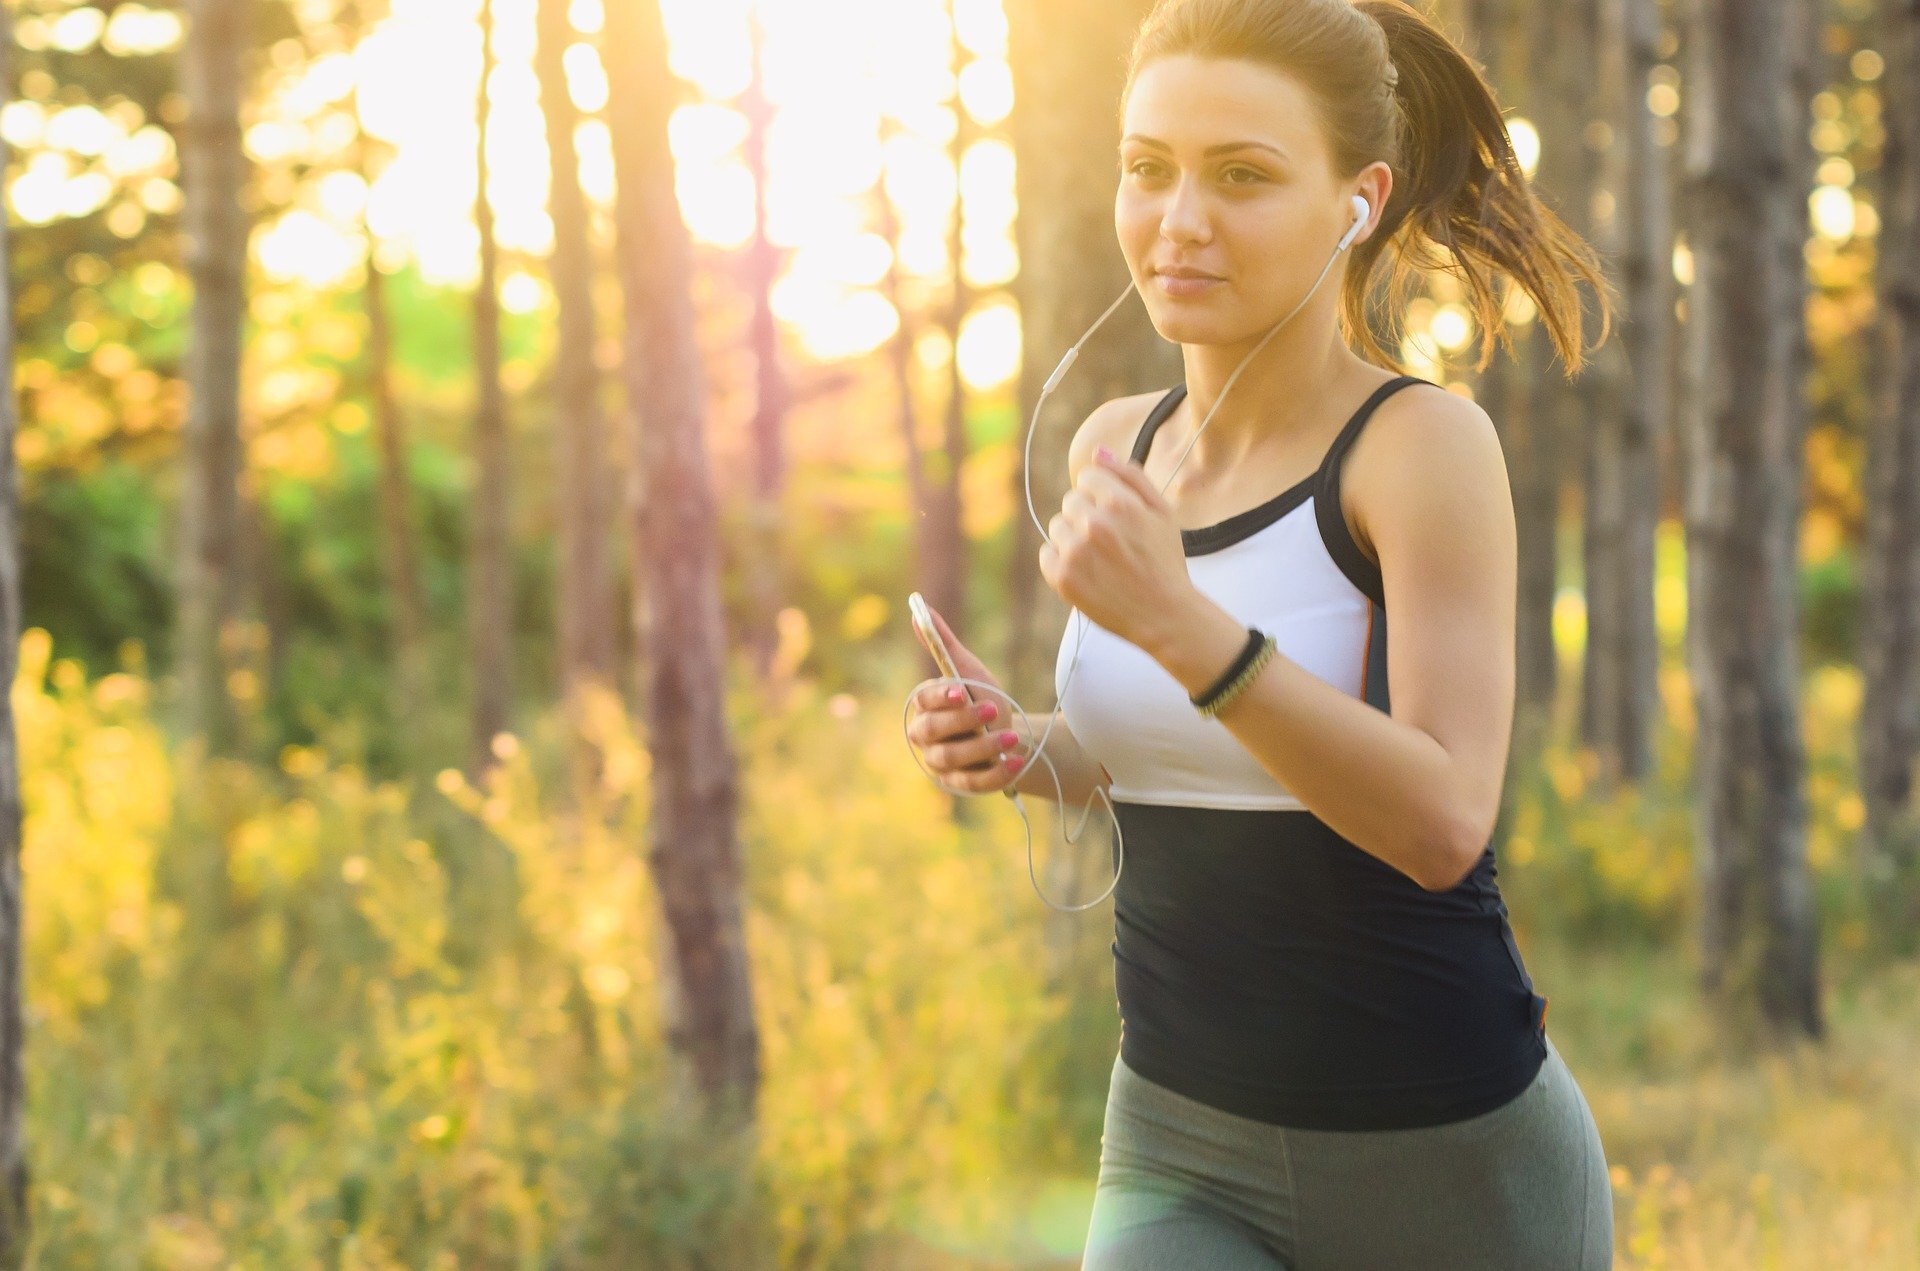 Restoring health and fitness with exercise